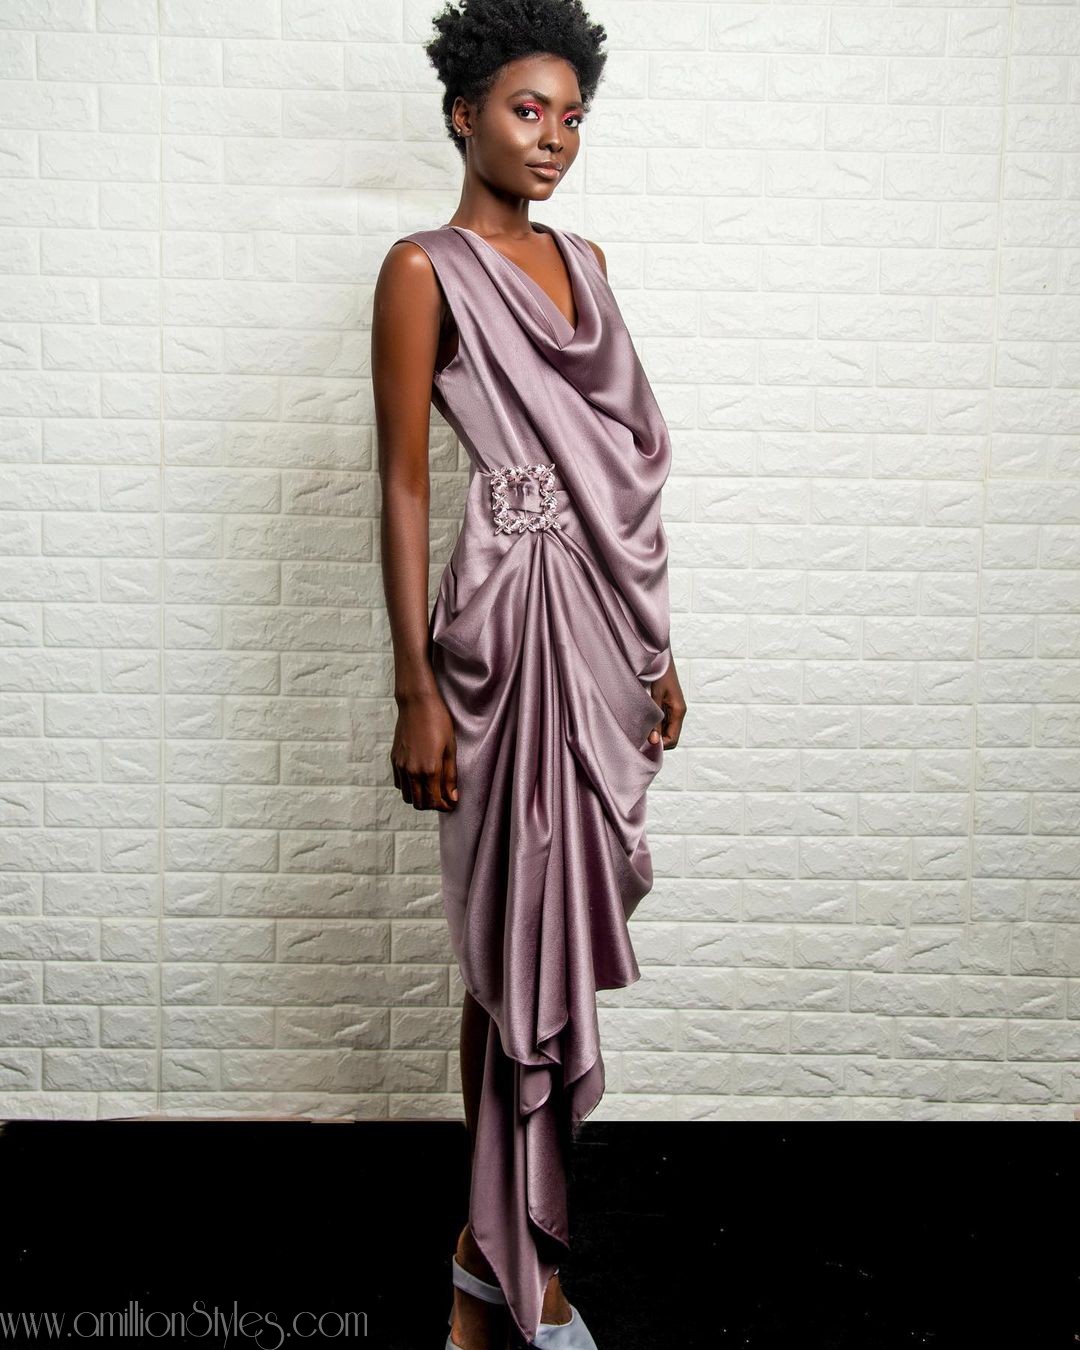 Spicy And Fabulous Dresses From Nigerian Designer, Yutee Rone